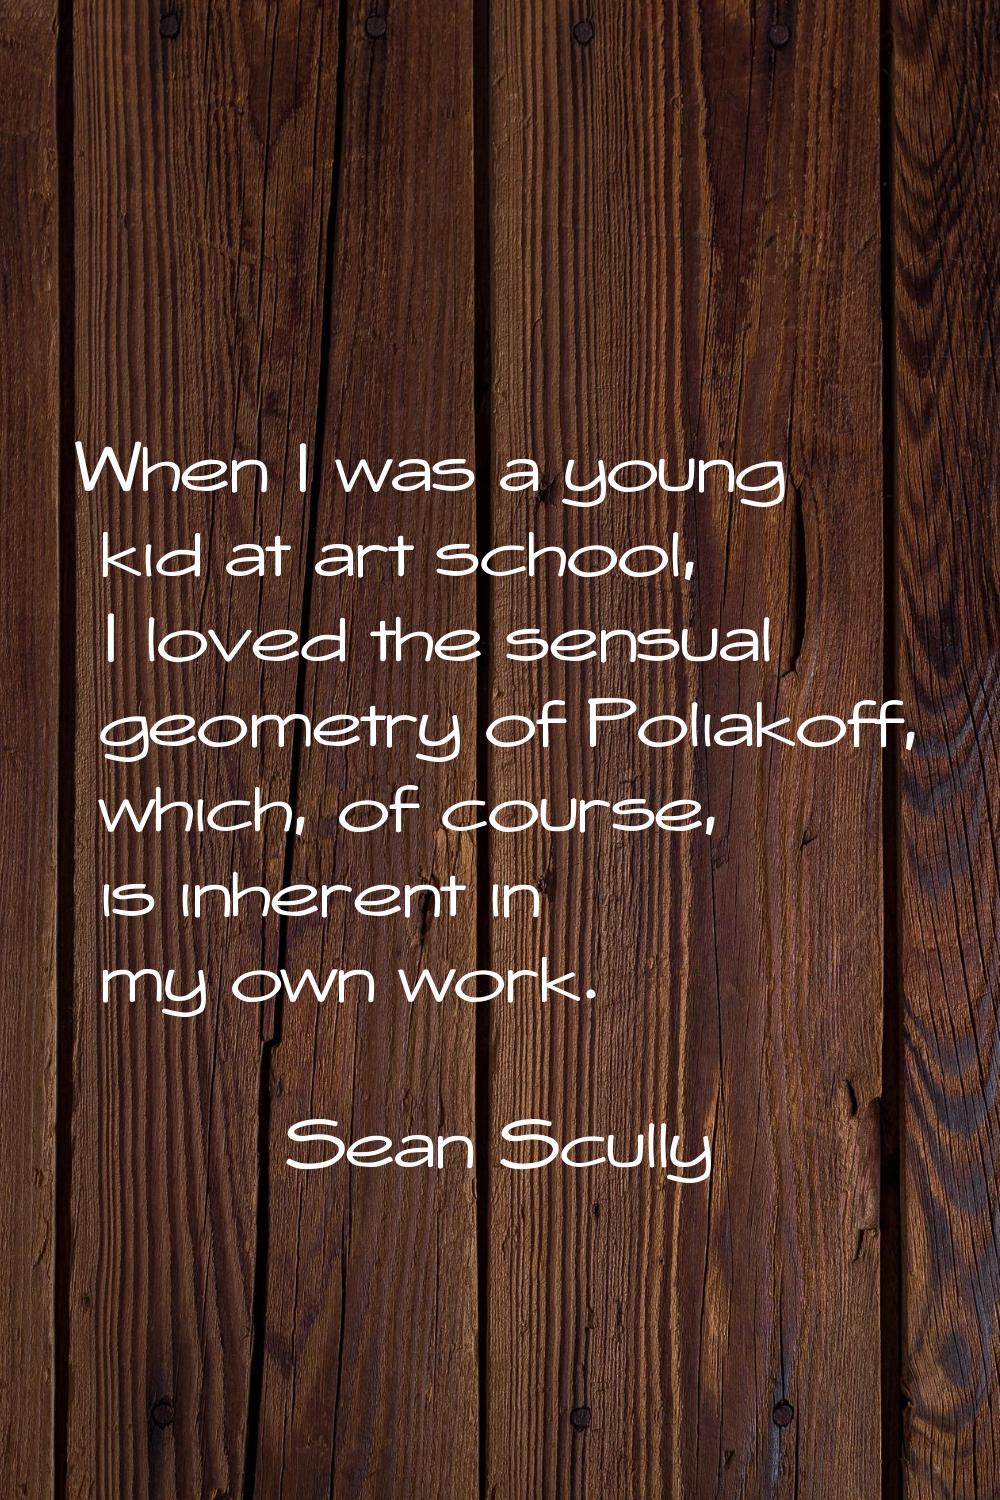 When I was a young kid at art school, I loved the sensual geometry of Poliakoff, which, of course, 